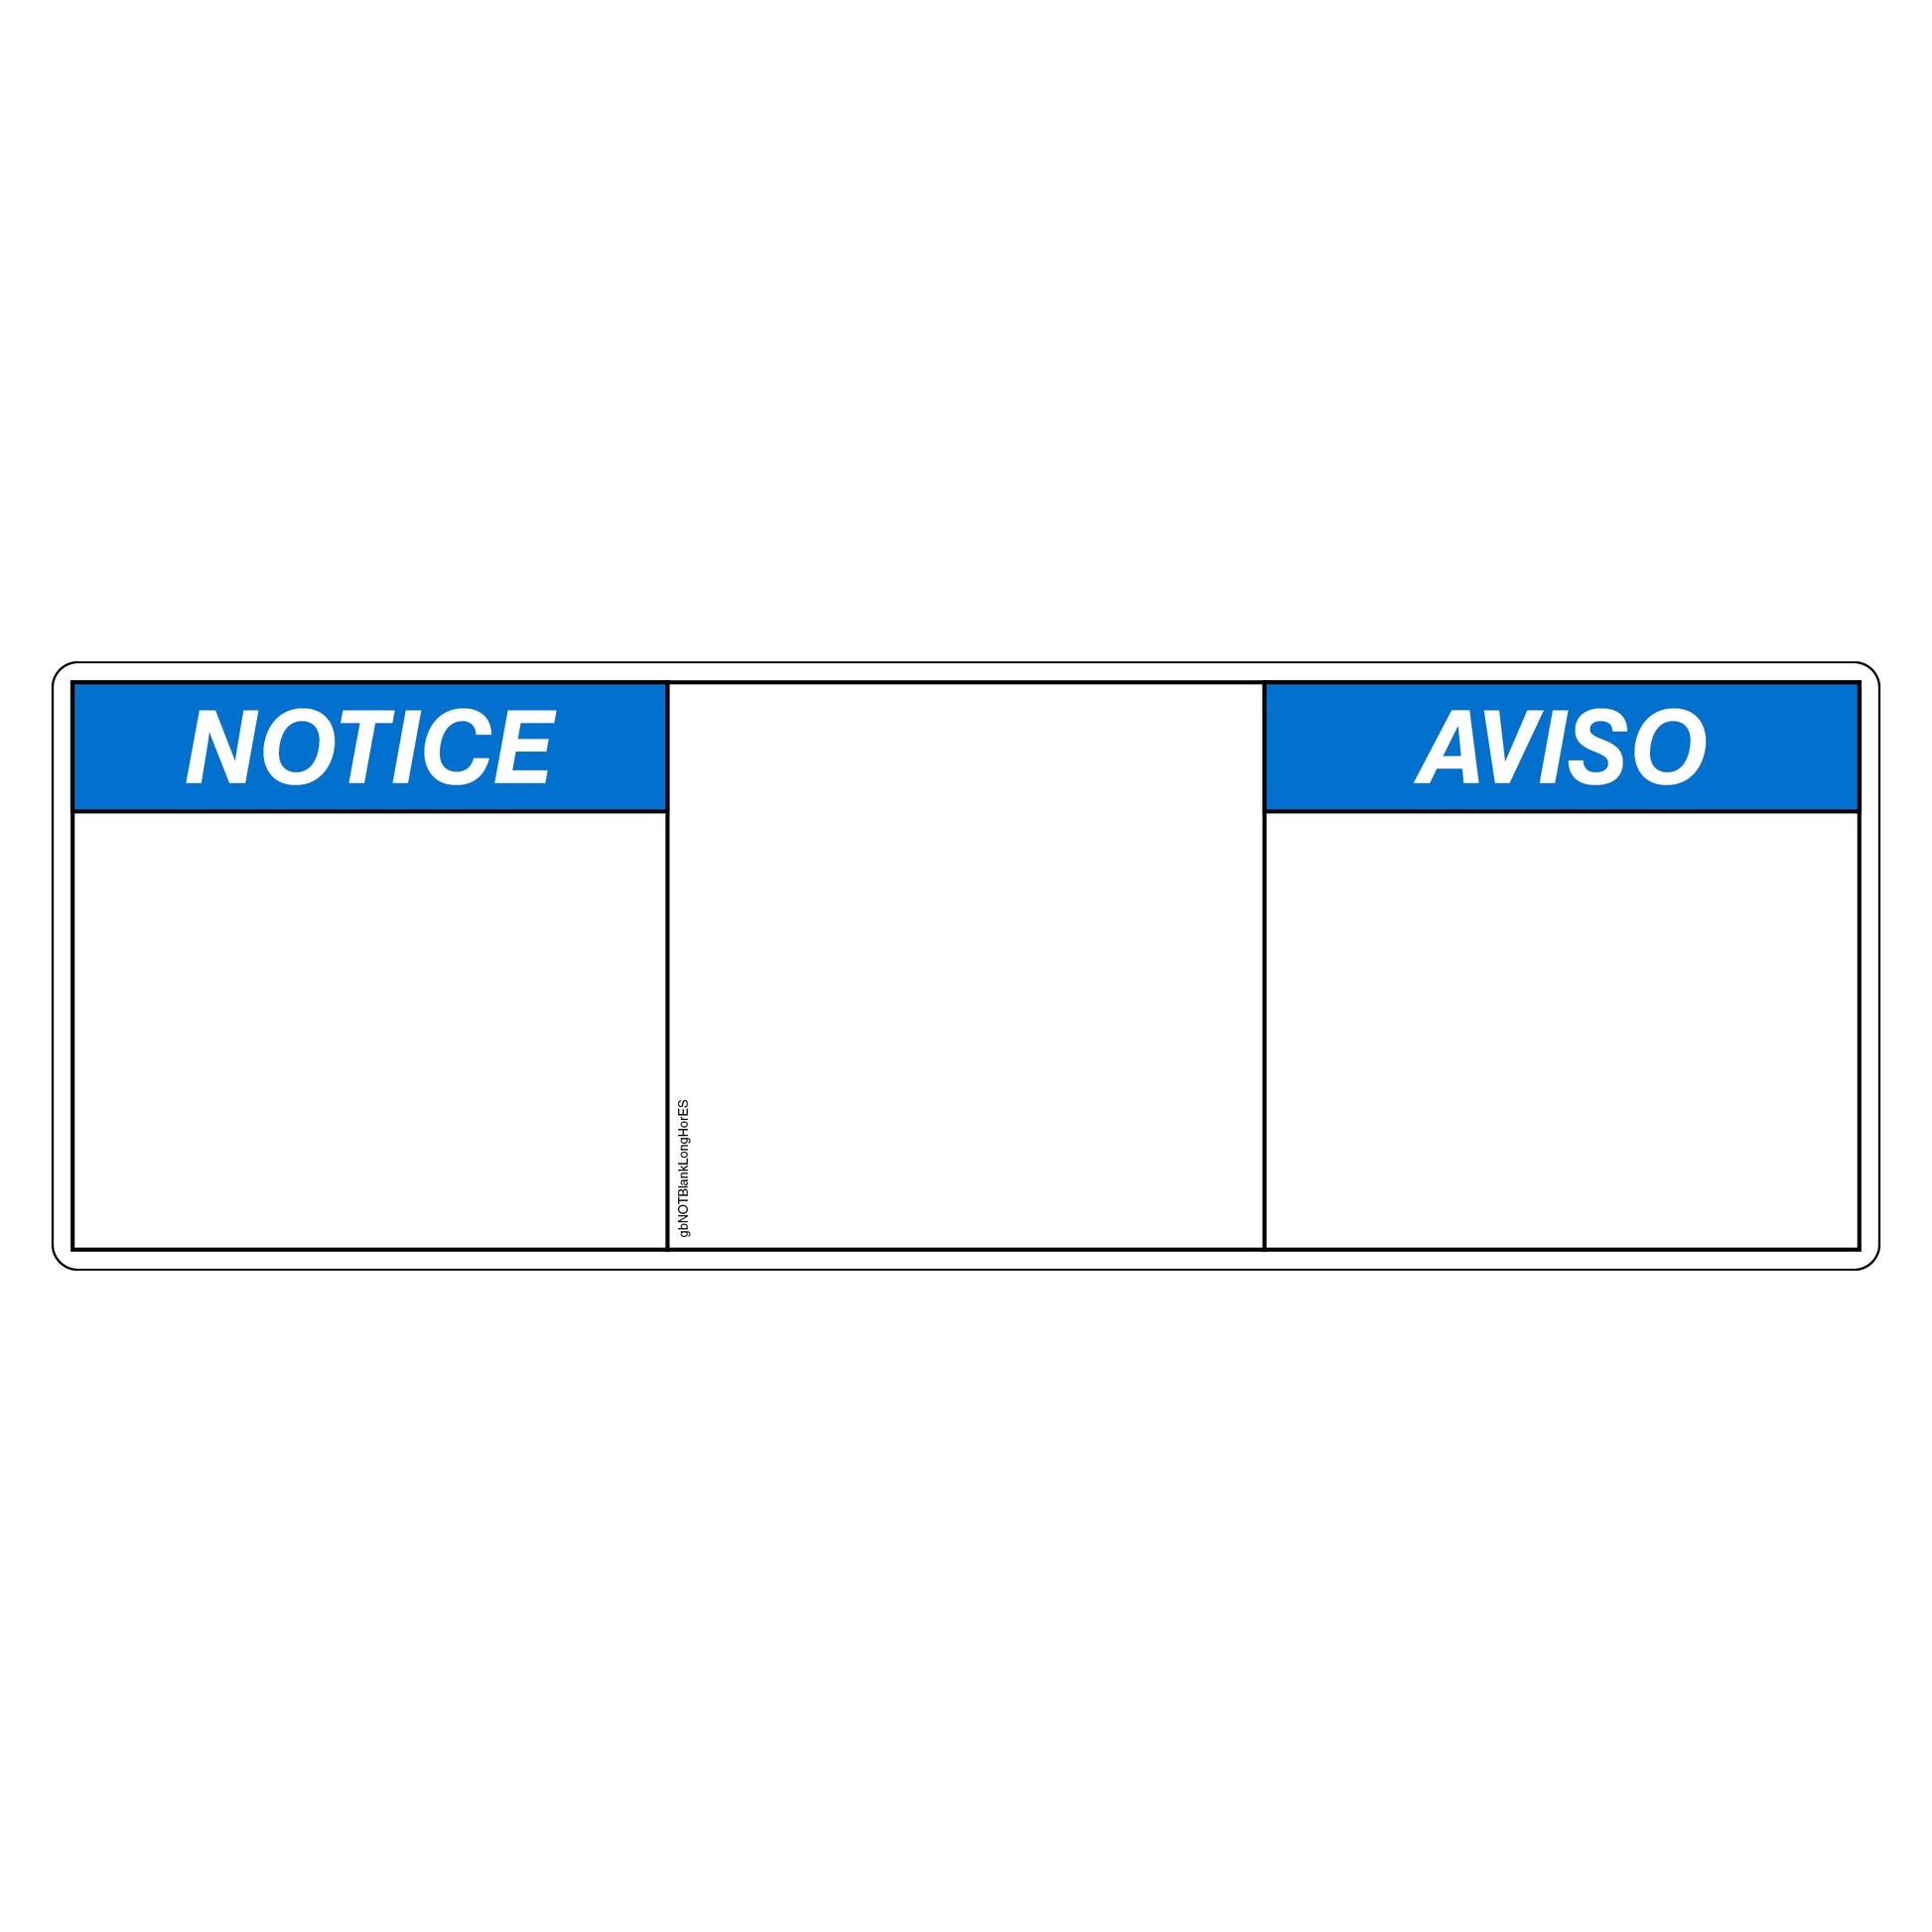 Customizable notice decal for long, bilingual messages